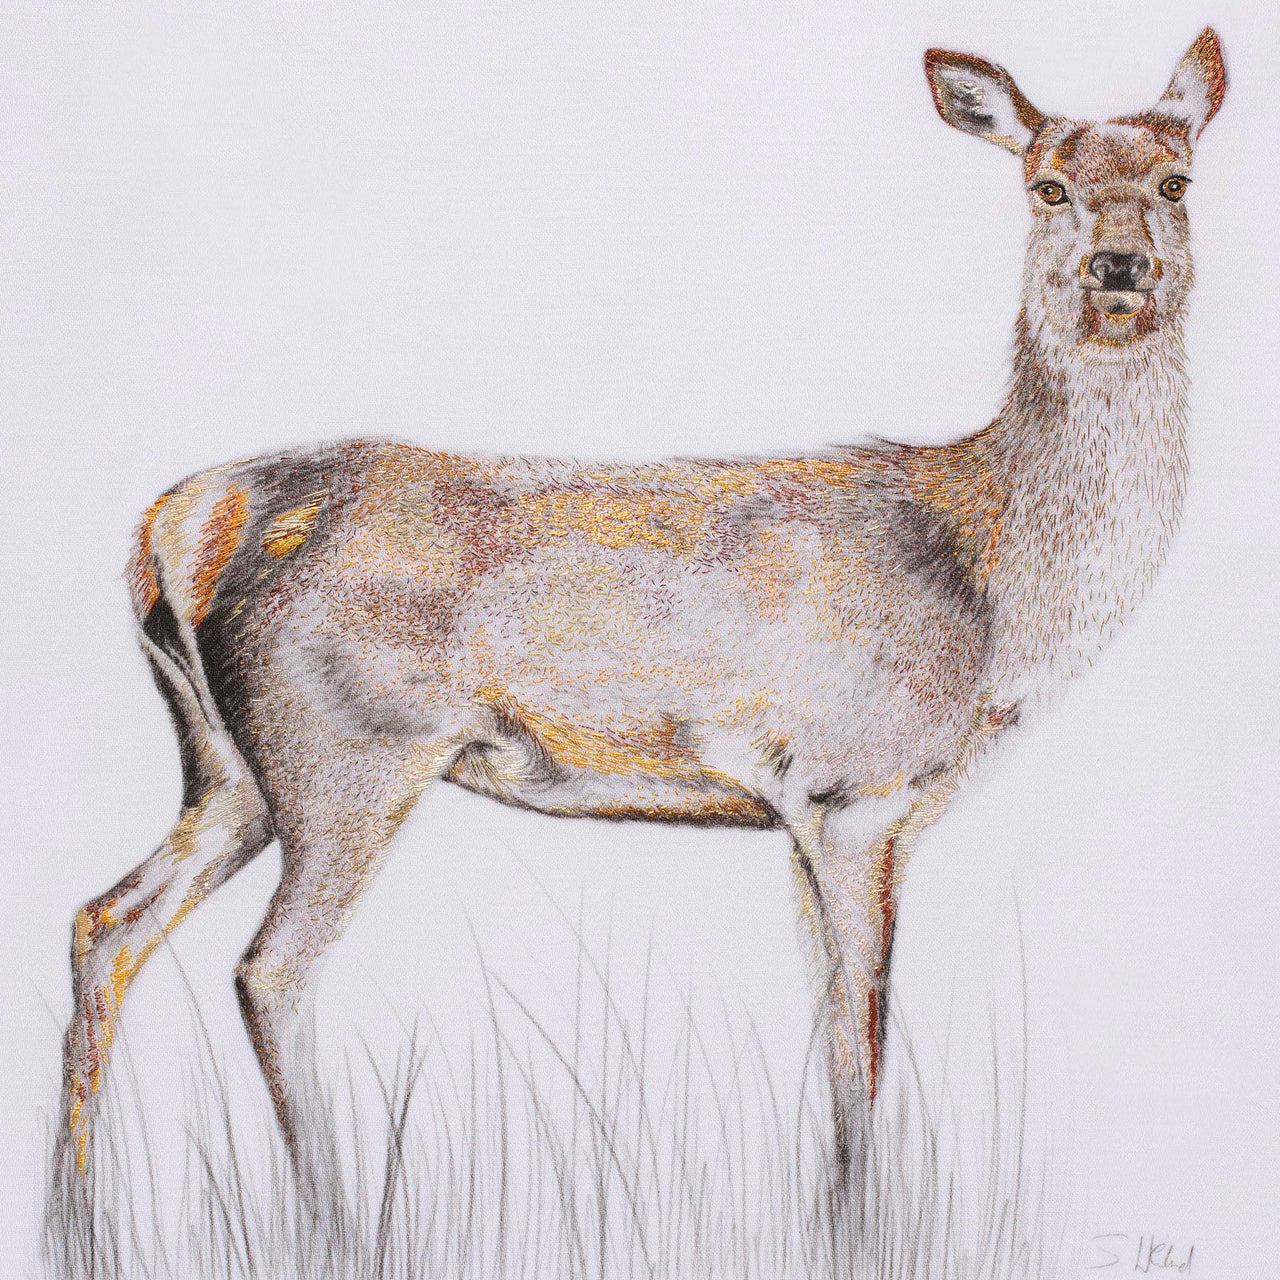 Hand embroidered deer limited edition print